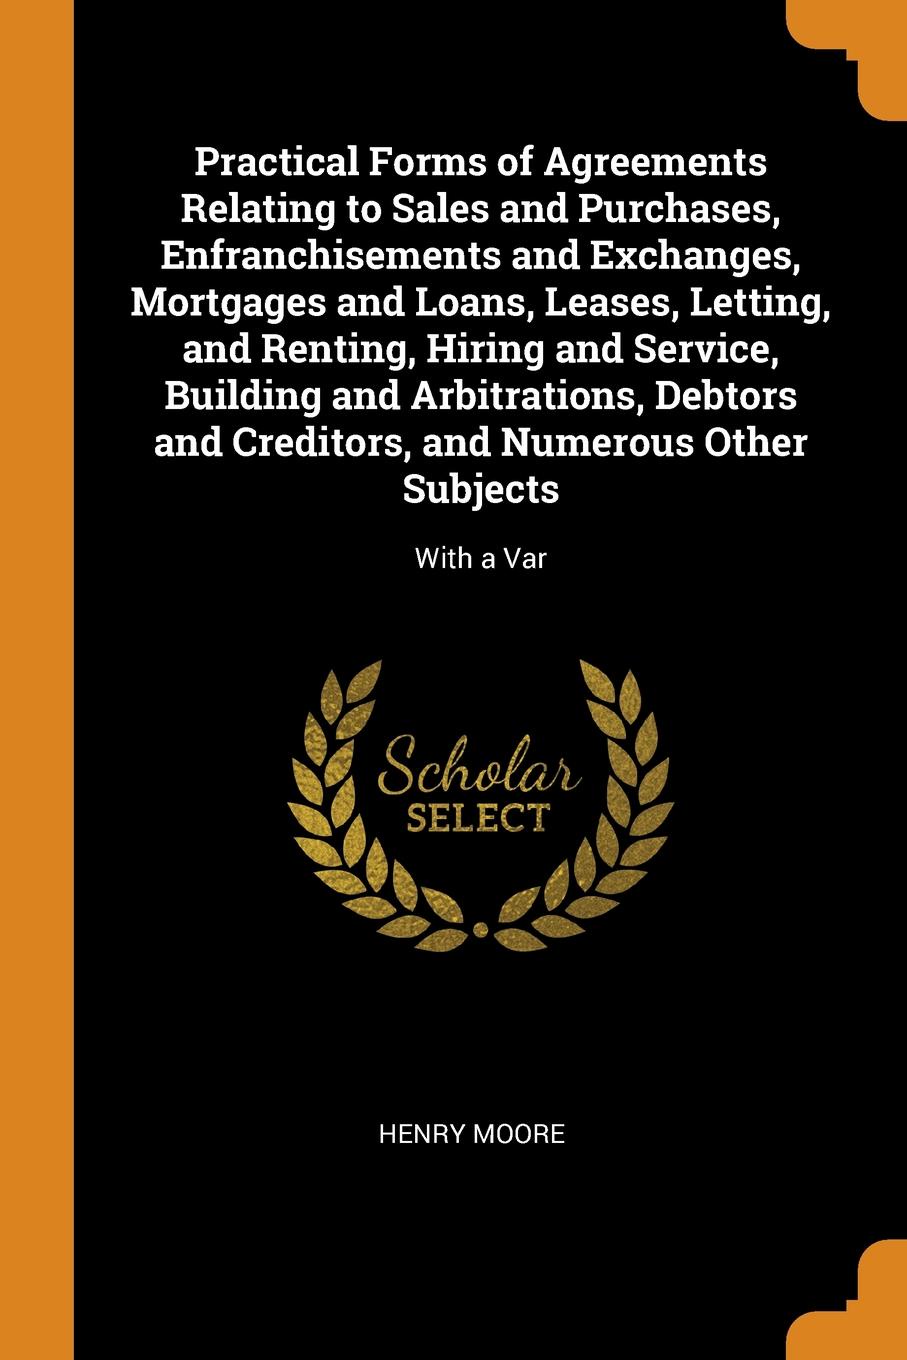 Practical Forms of Agreements Relating to Sales and Purchases, Enfranchisements and Exchanges, Mortgages and Loans, Leases, Letting, and Renting, Hiring and Service, Building and Arbitrations, Debtors and Creditors, and Numerous Other Subjects. Wi...